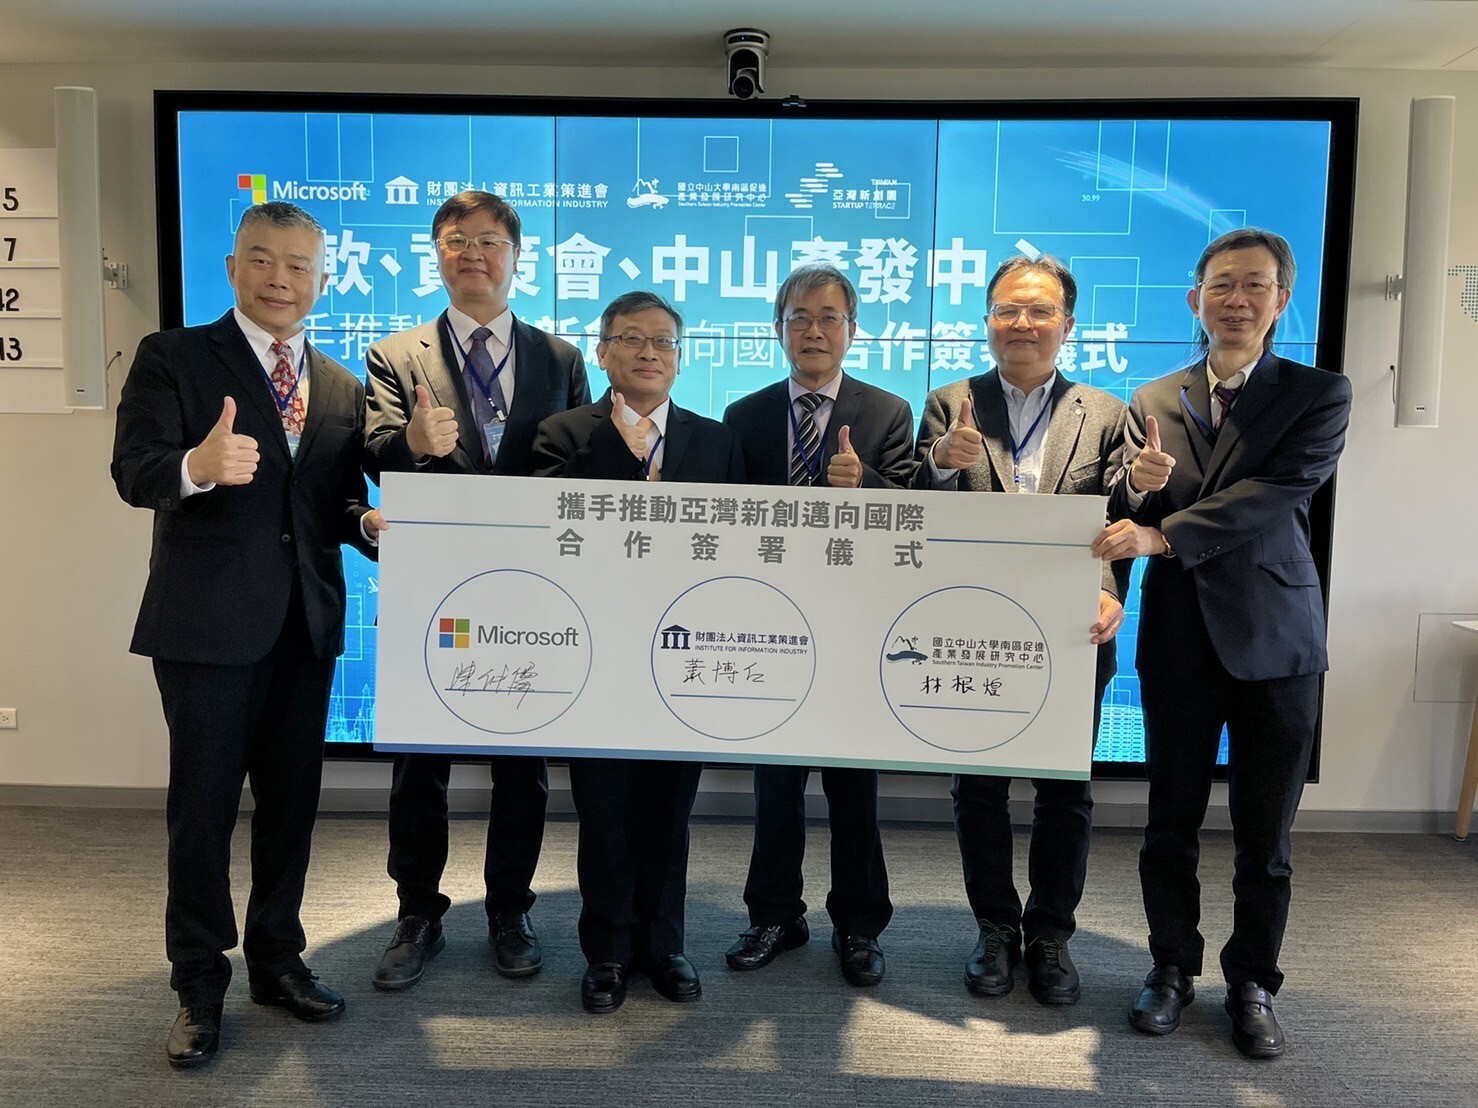 NSYSU President Ying-Yao Cheng (third from the right), Chief Secretary Long-Fon Hsieh (third from the left) of Small and Medium Enterprise Administration, and Deputy Mayor of Kaohsiung City Ta-Sheng Lo (second from the left) witnessed this important milestone.